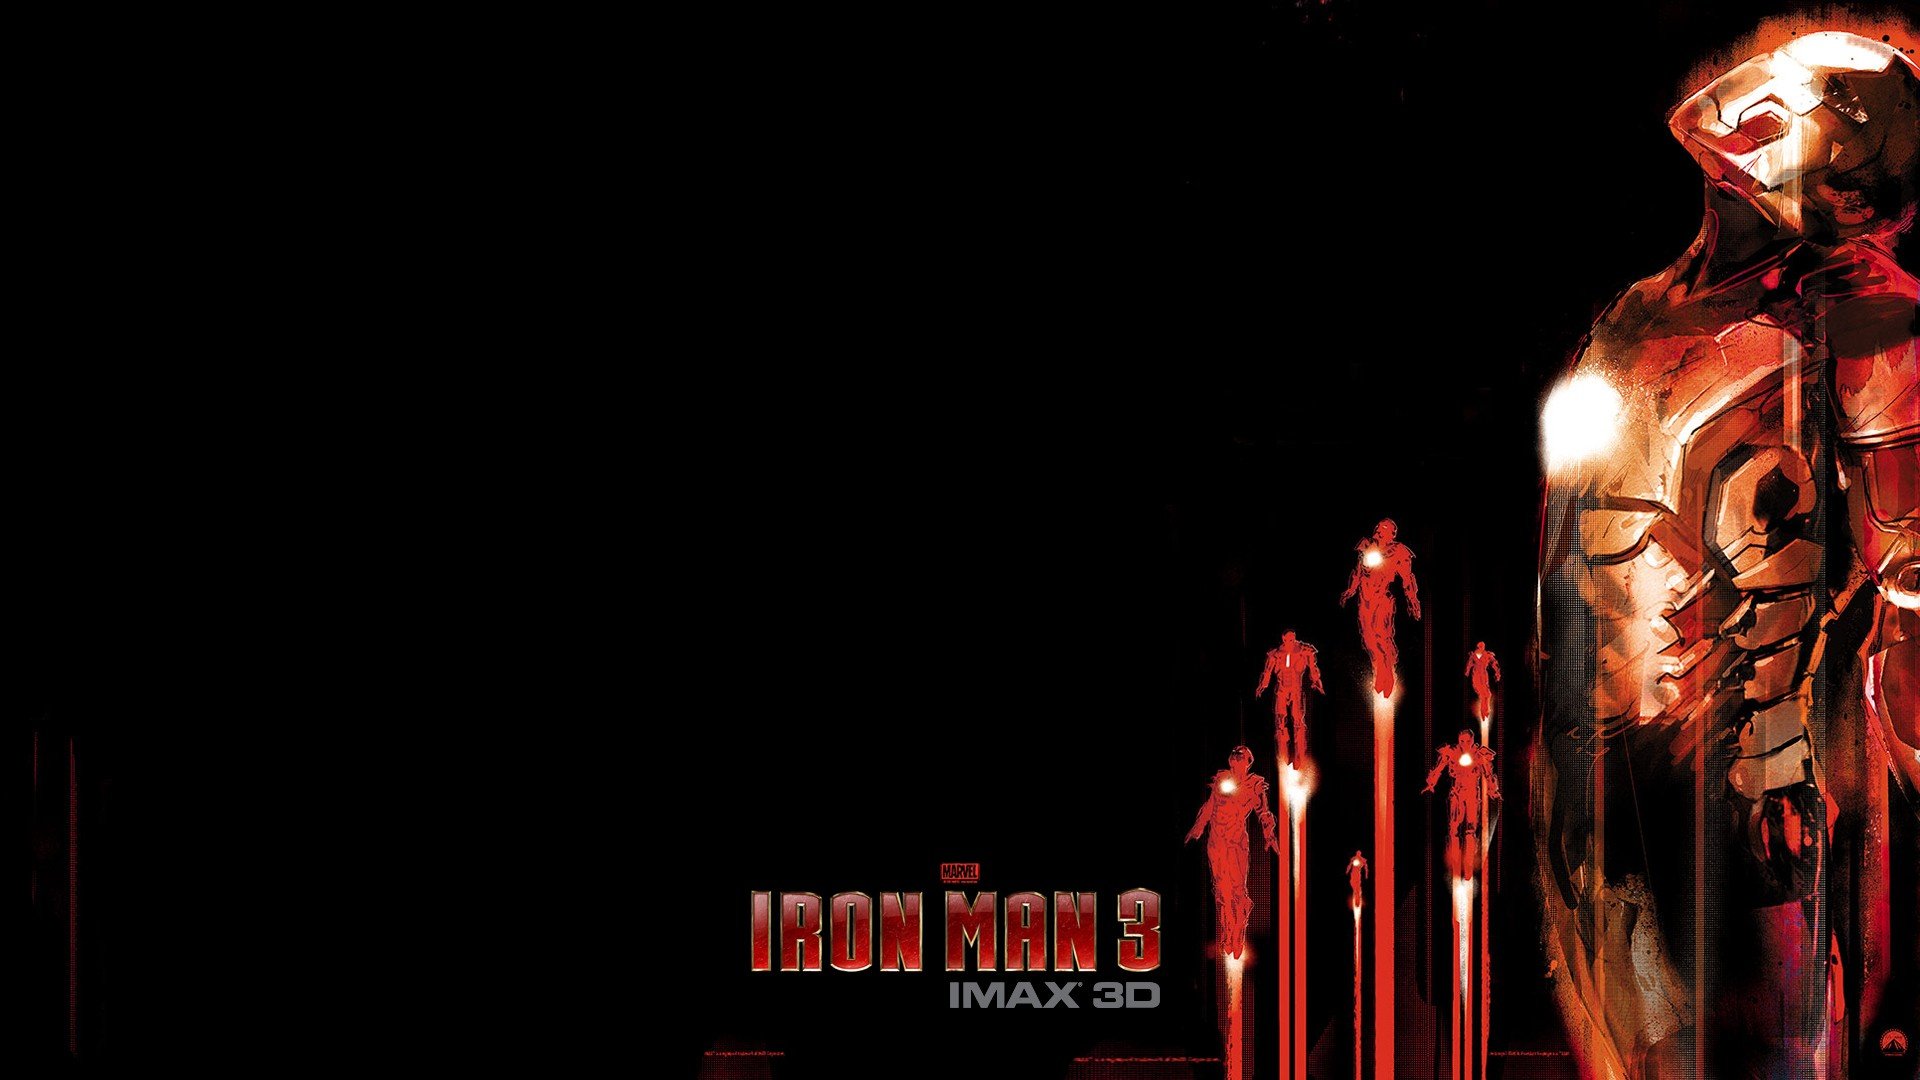 Iron Man 3 Full HD Wallpaper And Background Image 1920x1080 ID